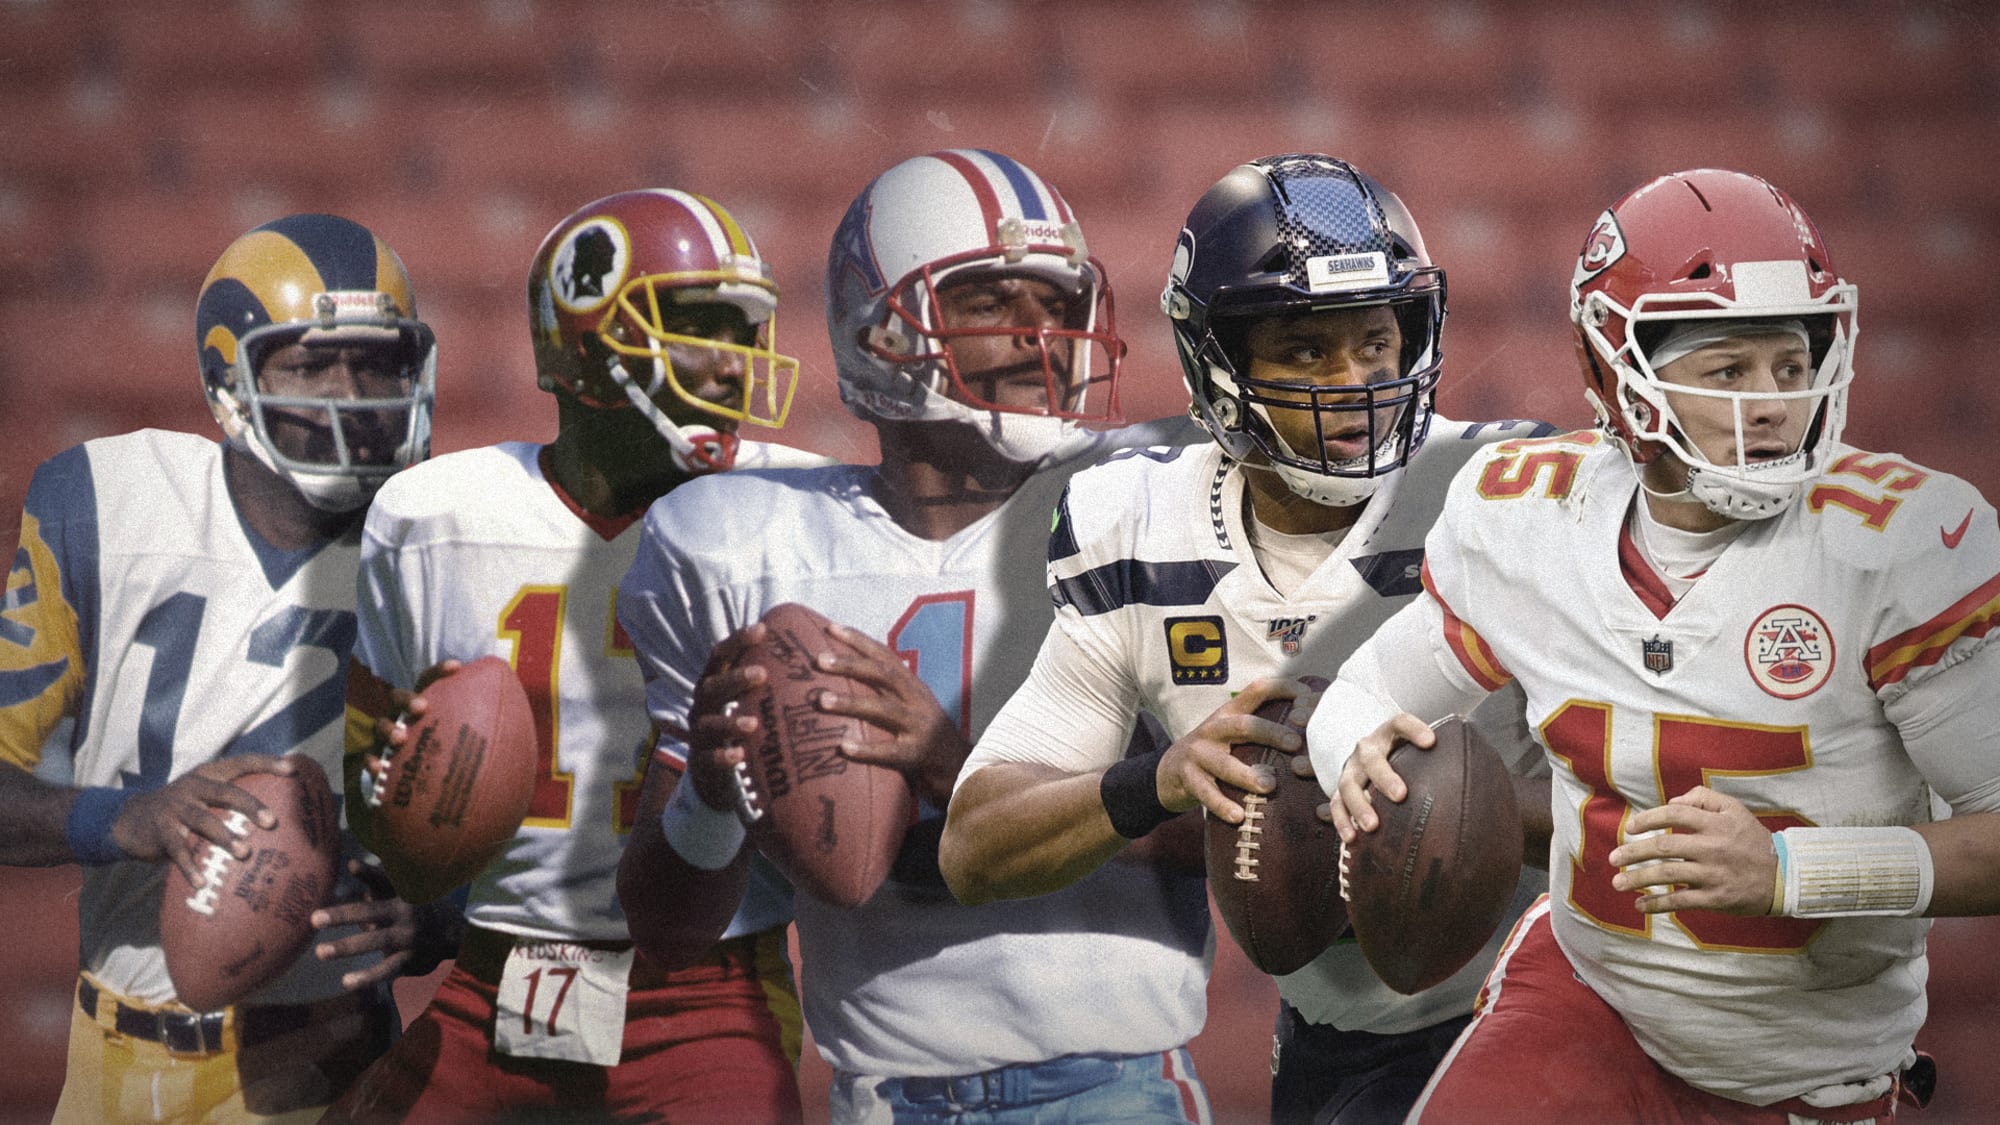 Black quarterbacks and their struggle in the NFL